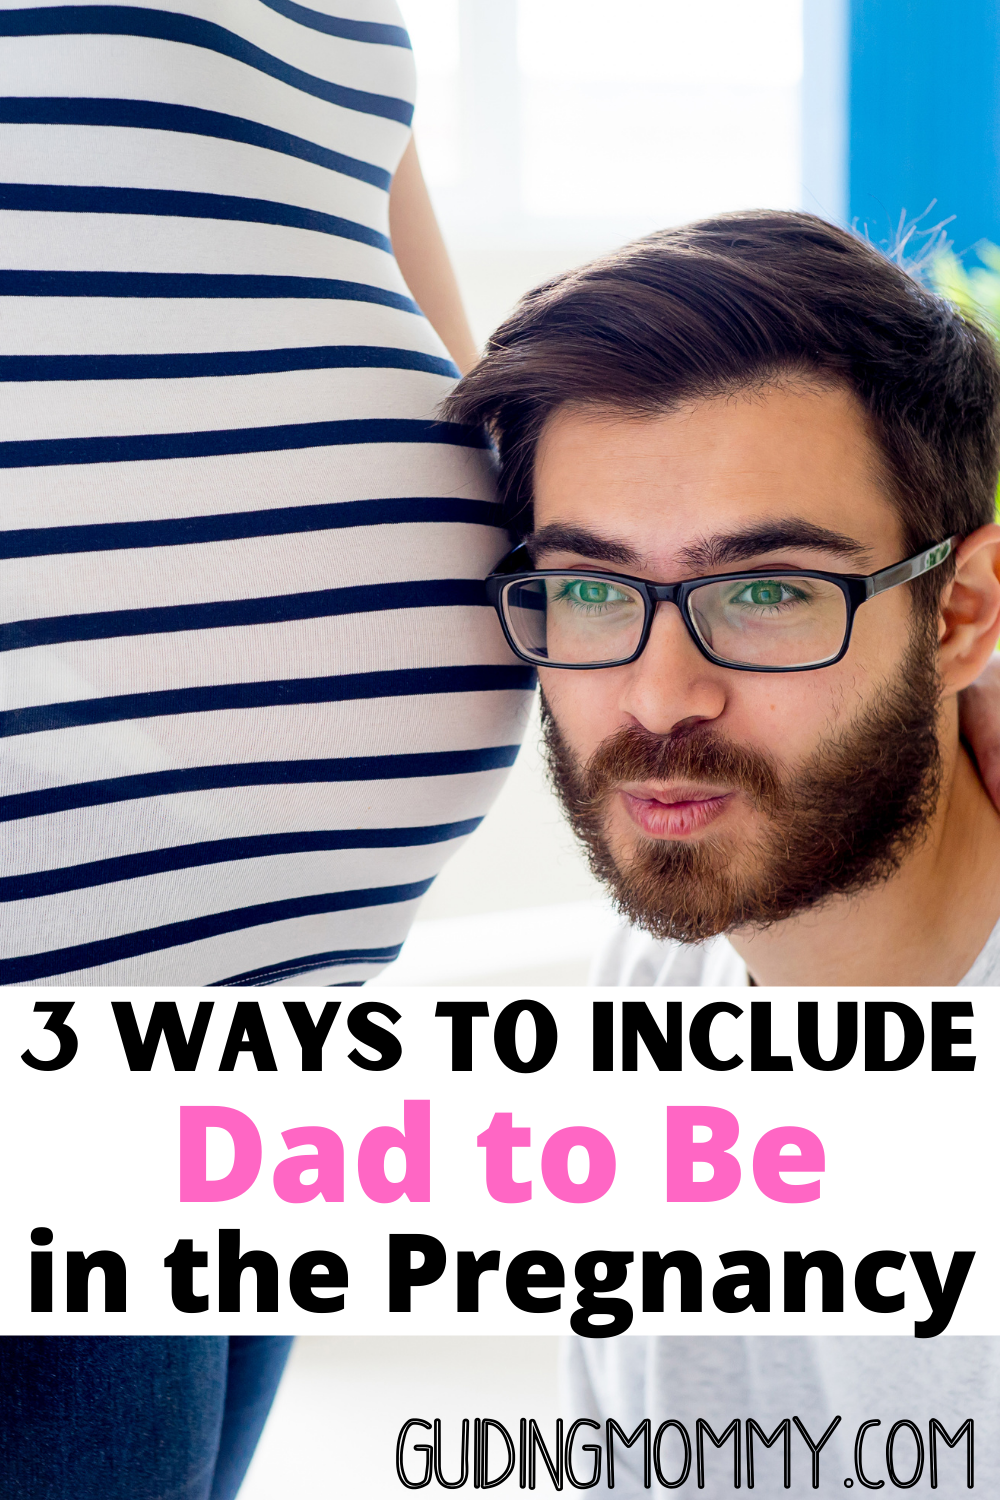 3 Ways to Include Dad to Be in the Pregnancy